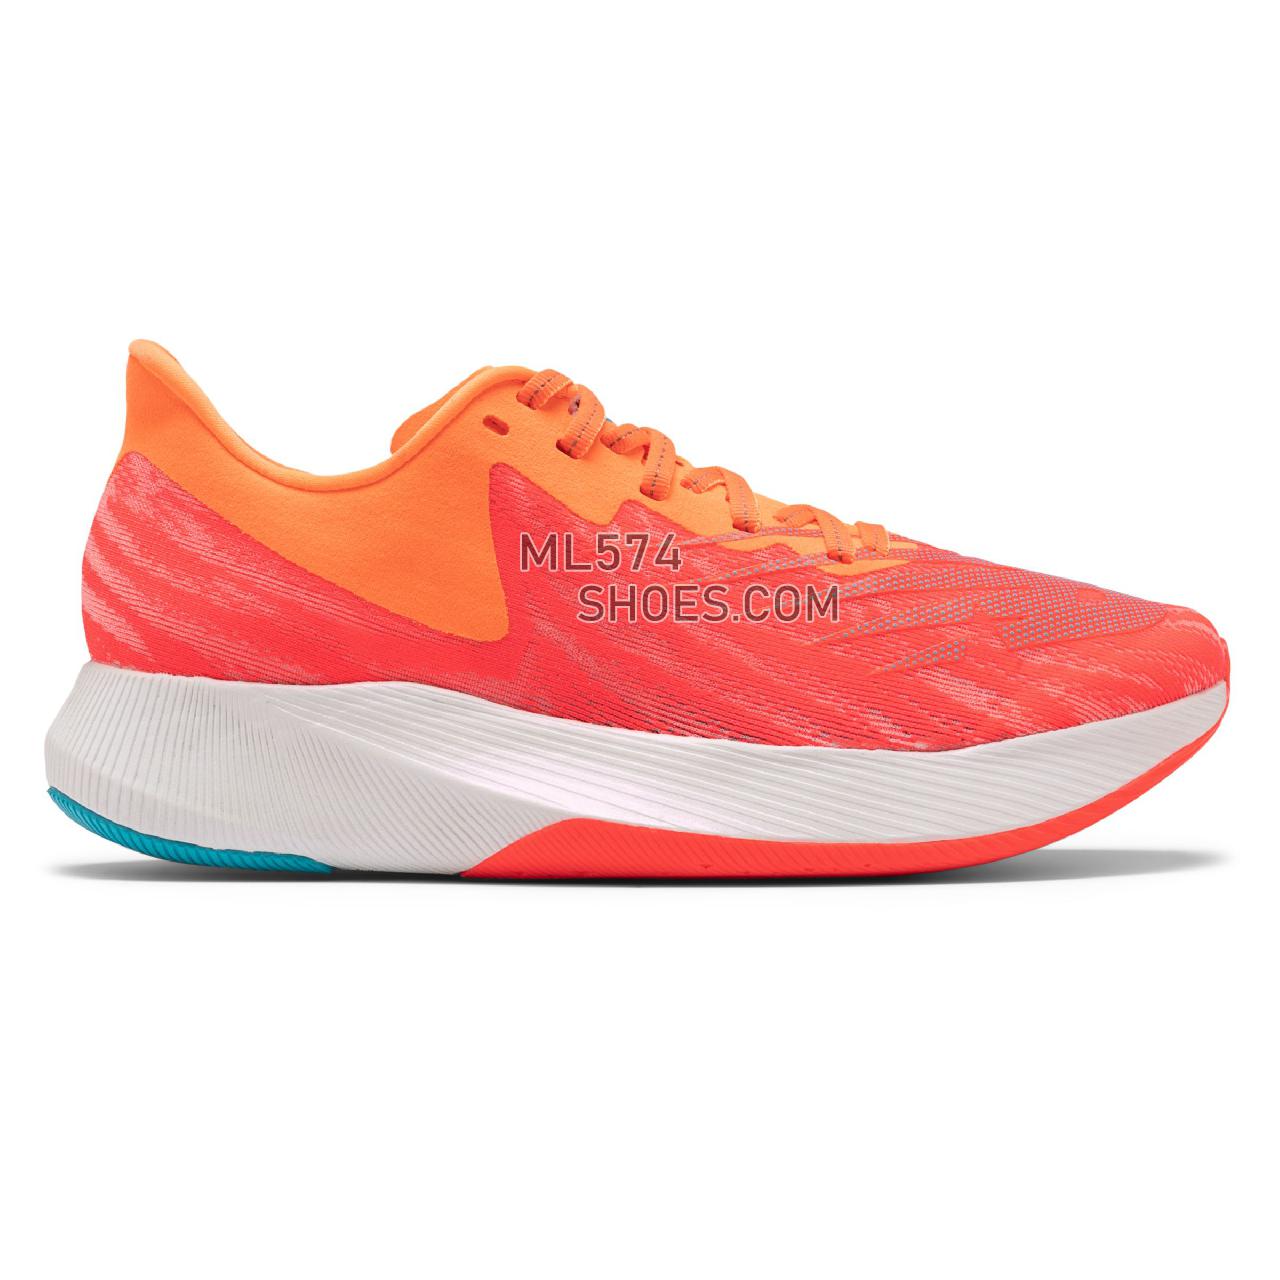 New Balance Fuelcell TC - Women's Classic Sneakers - Vivid Coral with Citrus Punch and Virtual Sky - WRCXVC1